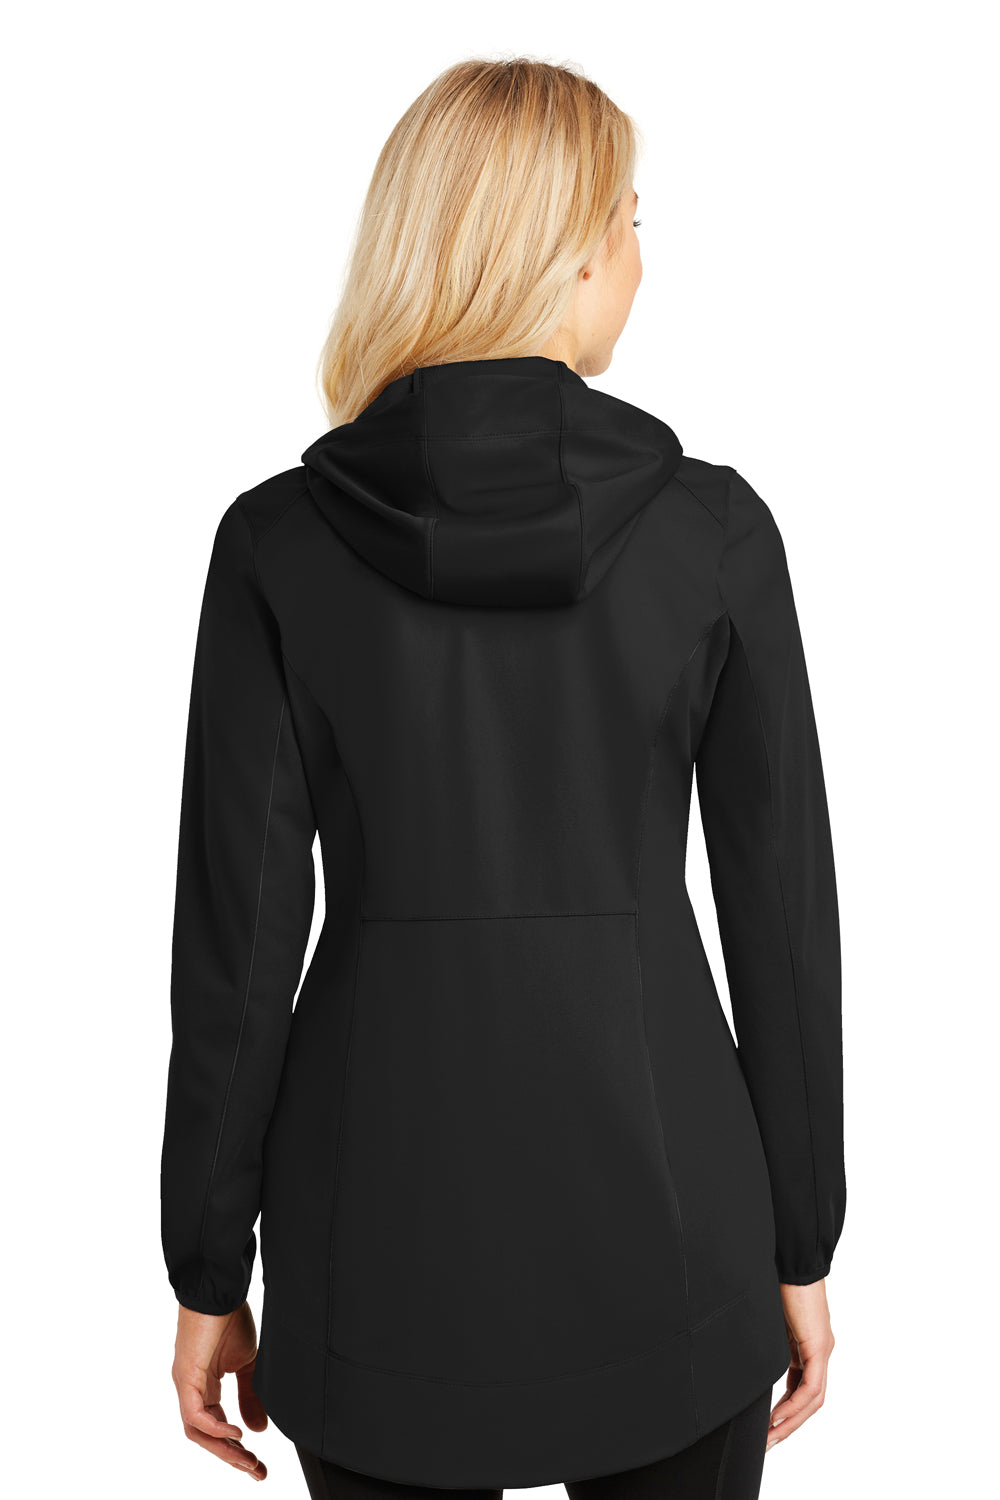 Port Authority L719 Womens Active Wind & Water Resistant Full Zip Hooded Jacket Black Back